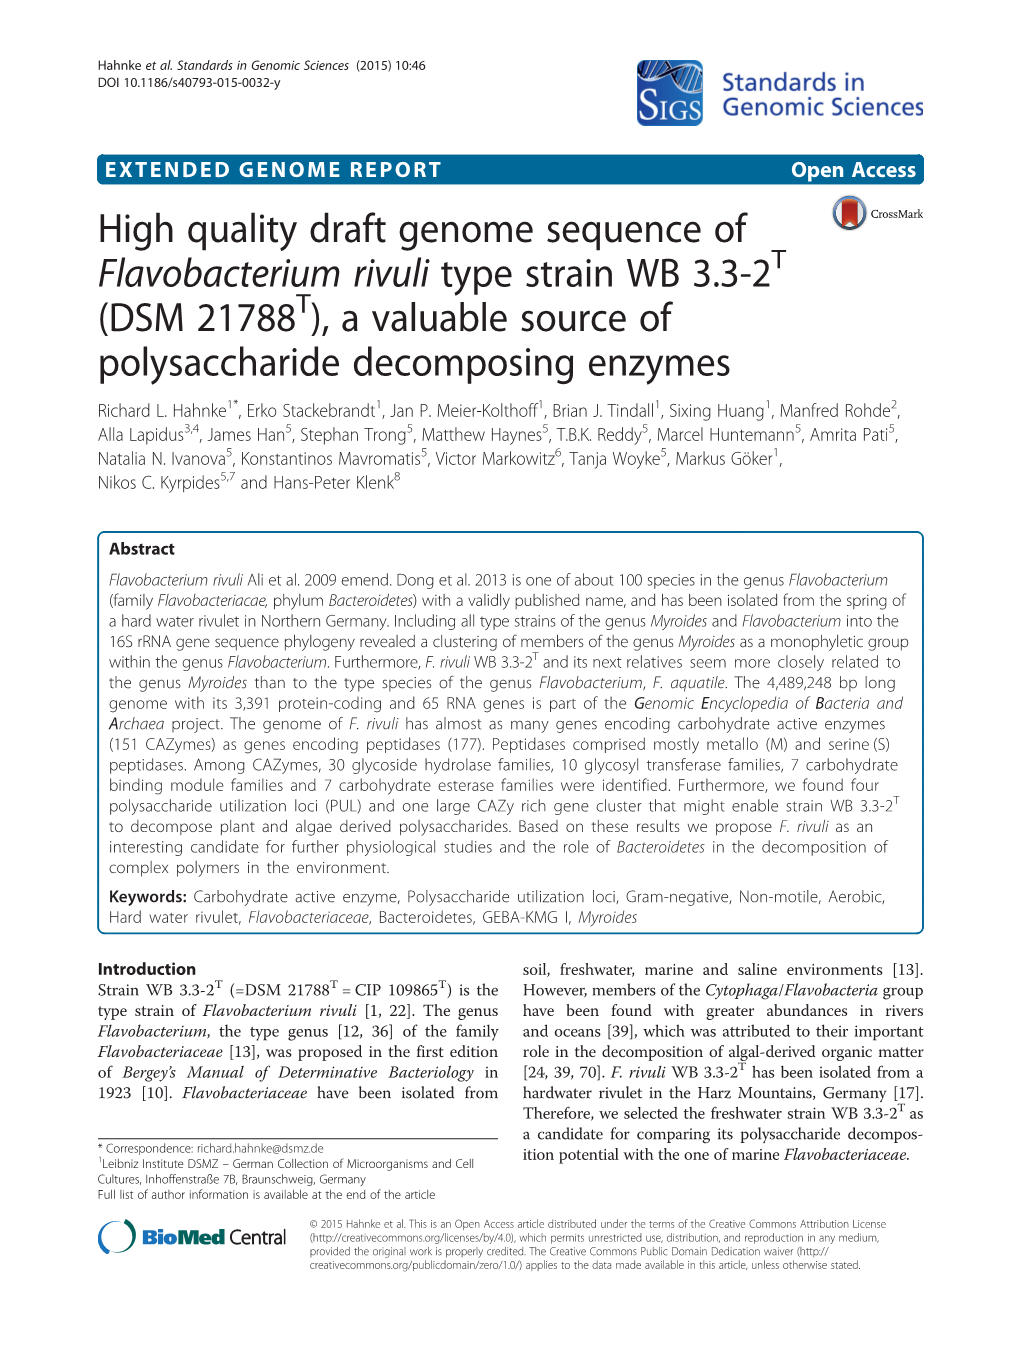 High Quality Draft Genome Sequence of Flavobacterium Rivuli Type Strain WB 3.3-2T (DSM 21788T), a Valuable Source of Polysaccharide Decomposing Enzymes Richard L